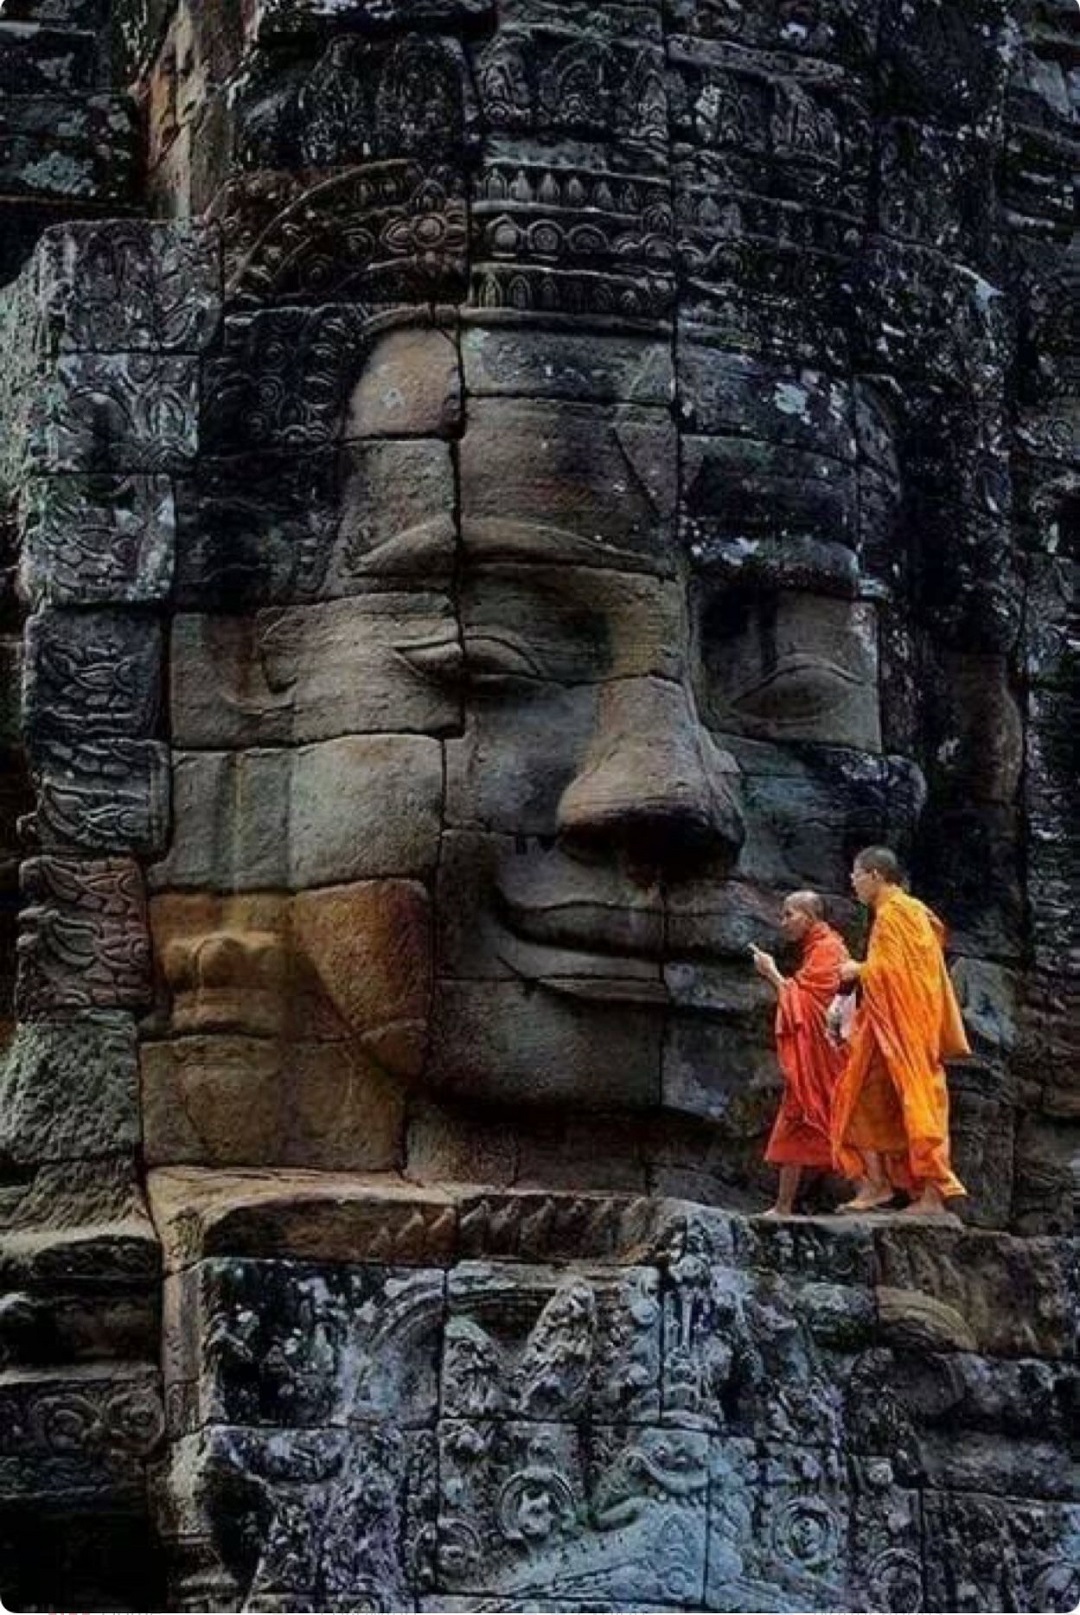 A 12th Century Ce; Bayon Temple, One Of The More Famous, Popular, And Beautiful Of Structures In Angkor Wat Archaeological Park, Cambodia